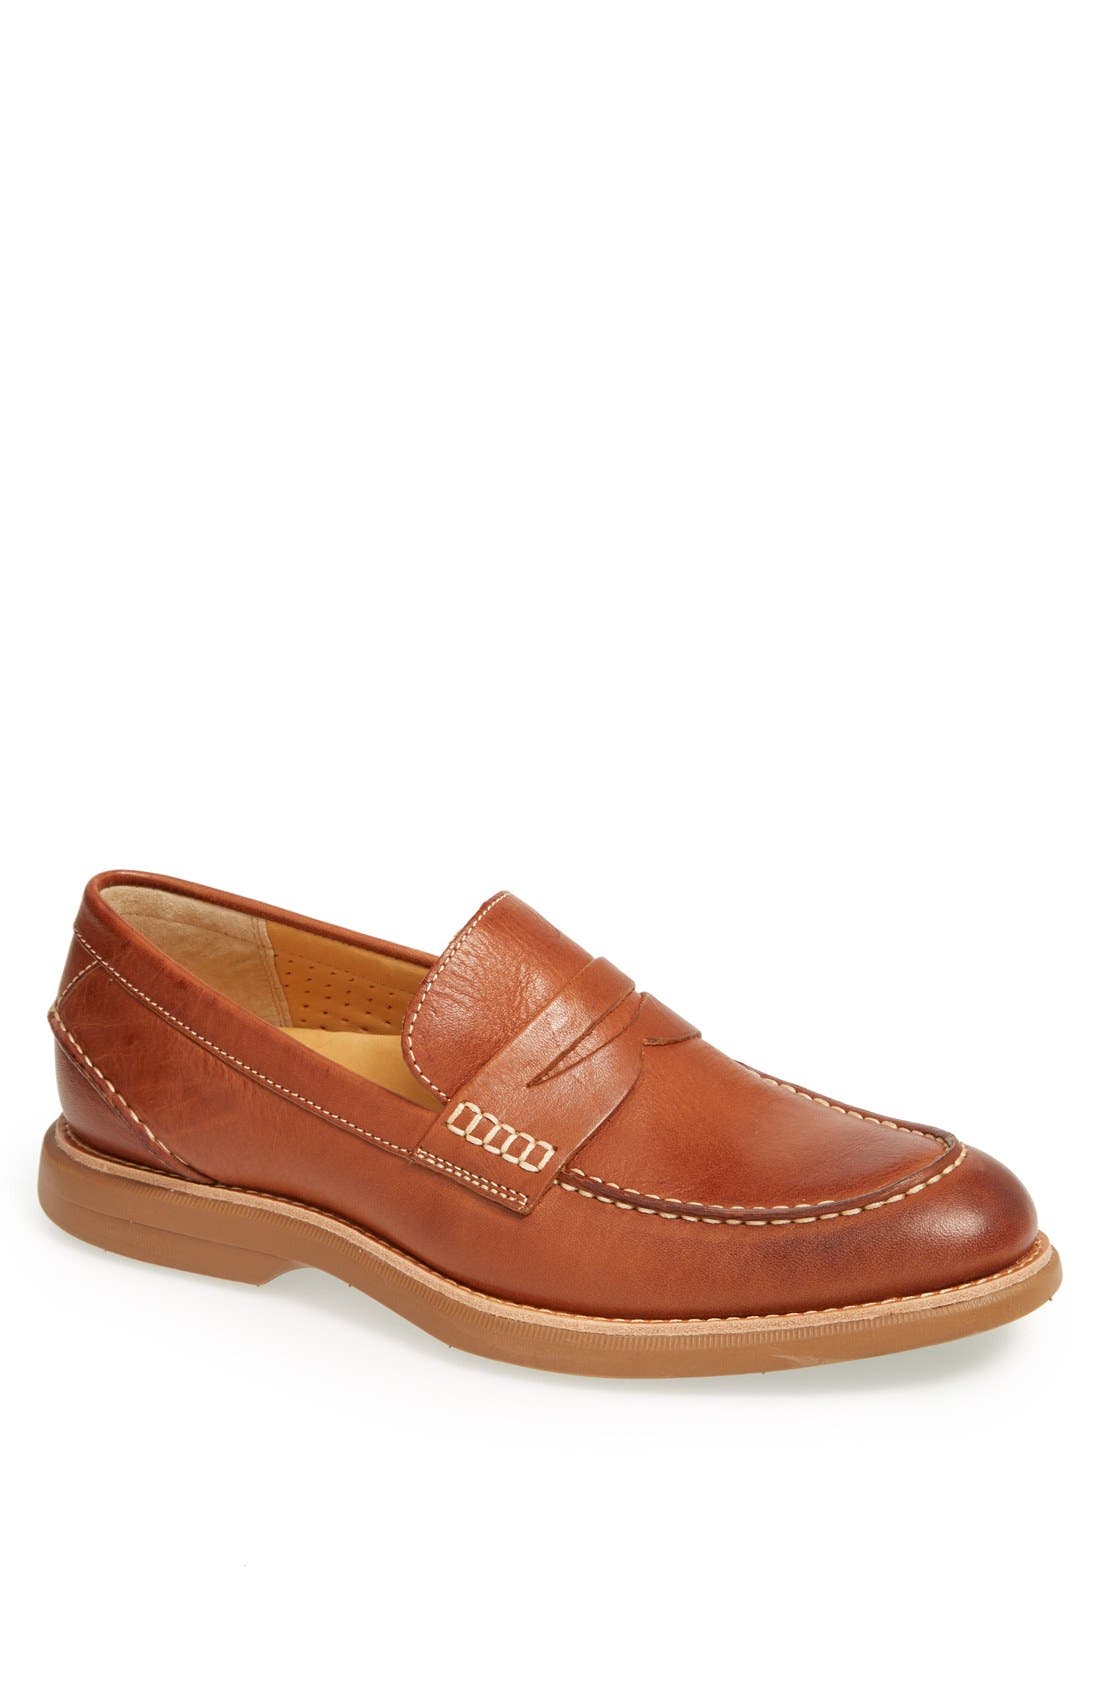 sperry top sider penny loafers